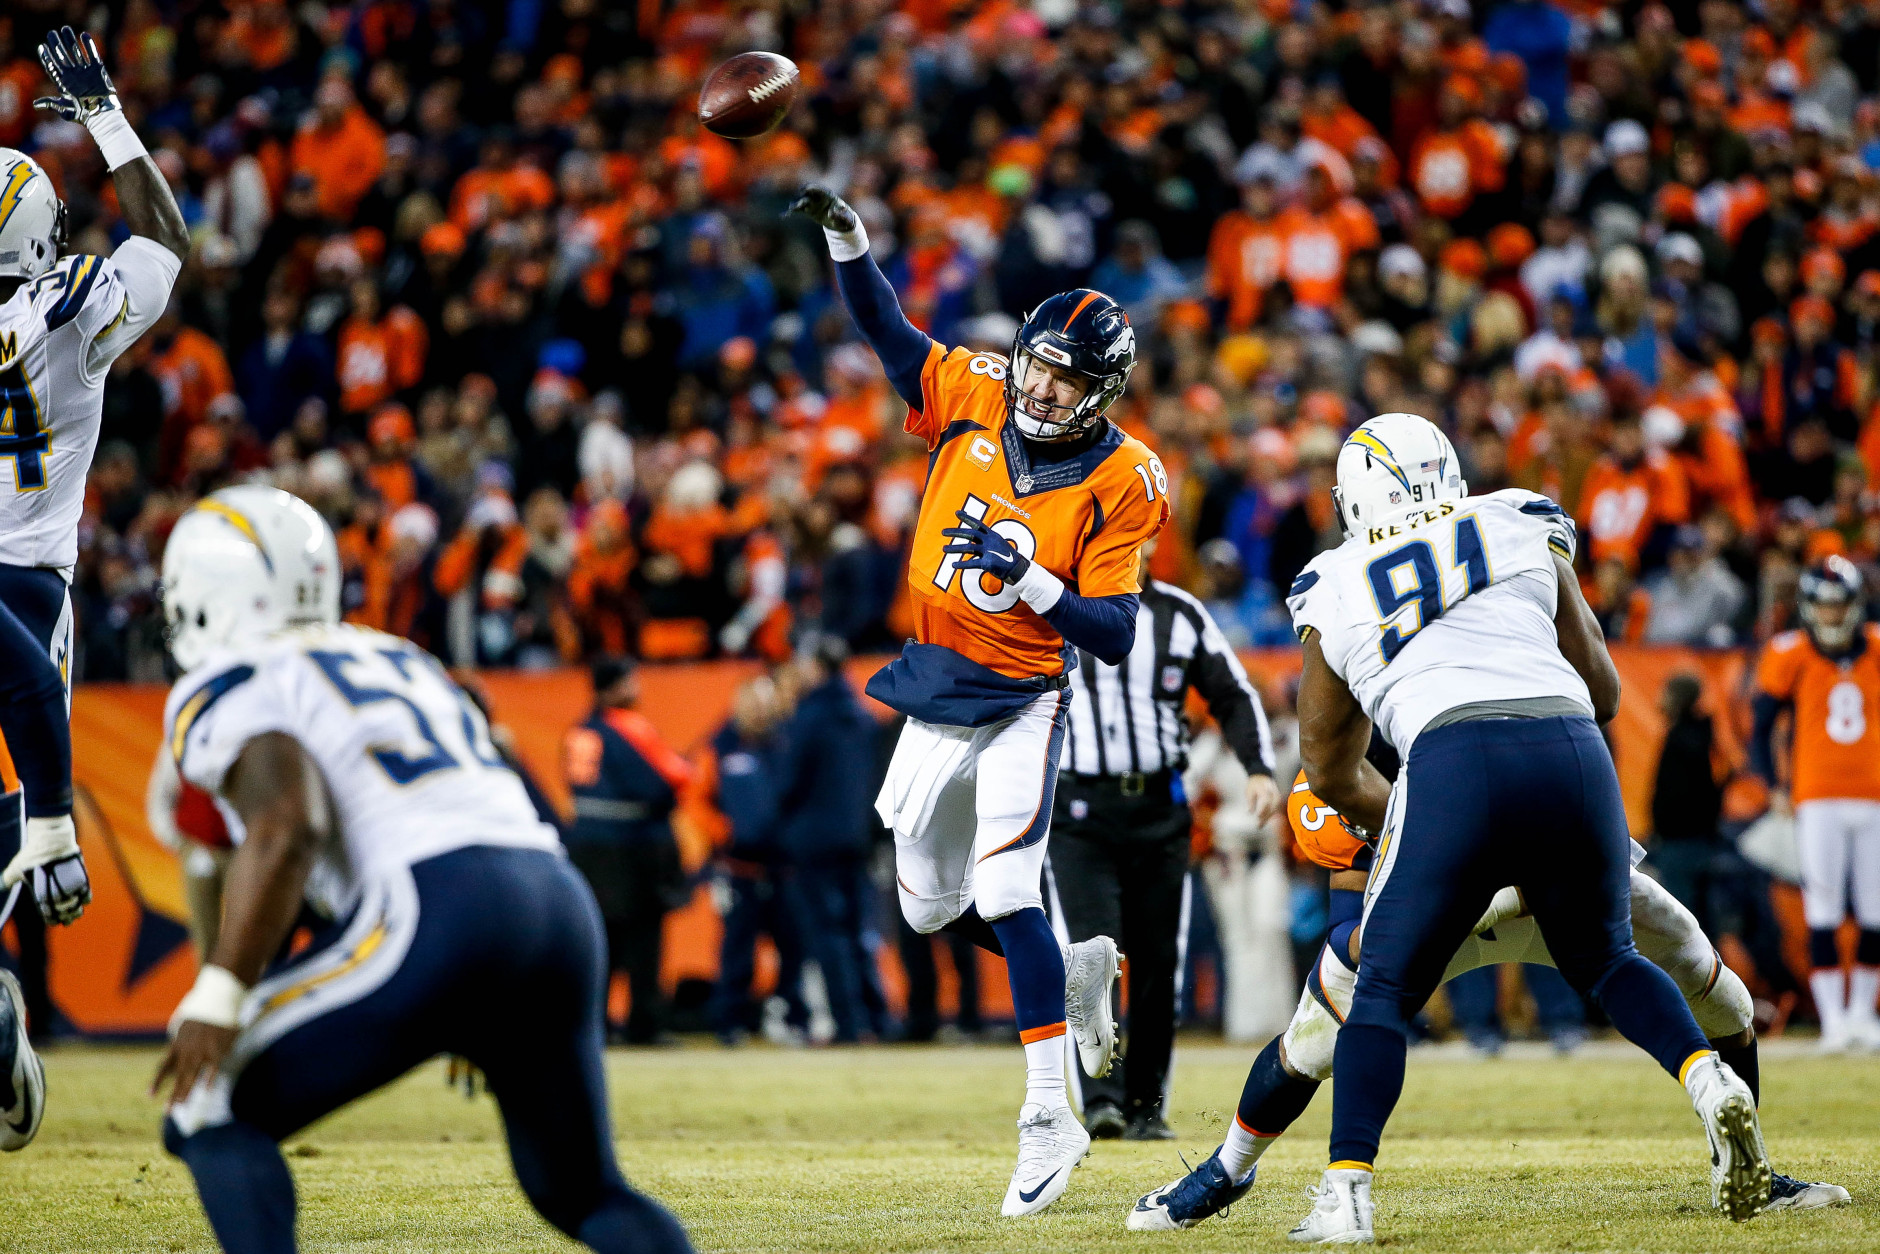 DENVER, CO - JANUARY 3:  Quarterback Peyton Manning #18 of the Denver Broncos passes against the San Diego Chargers during a game at Sports Authority Field at Mile High on January 3, 2016 in Denver, Colorado. (Photo by Sean M. Haffey/Getty Images)